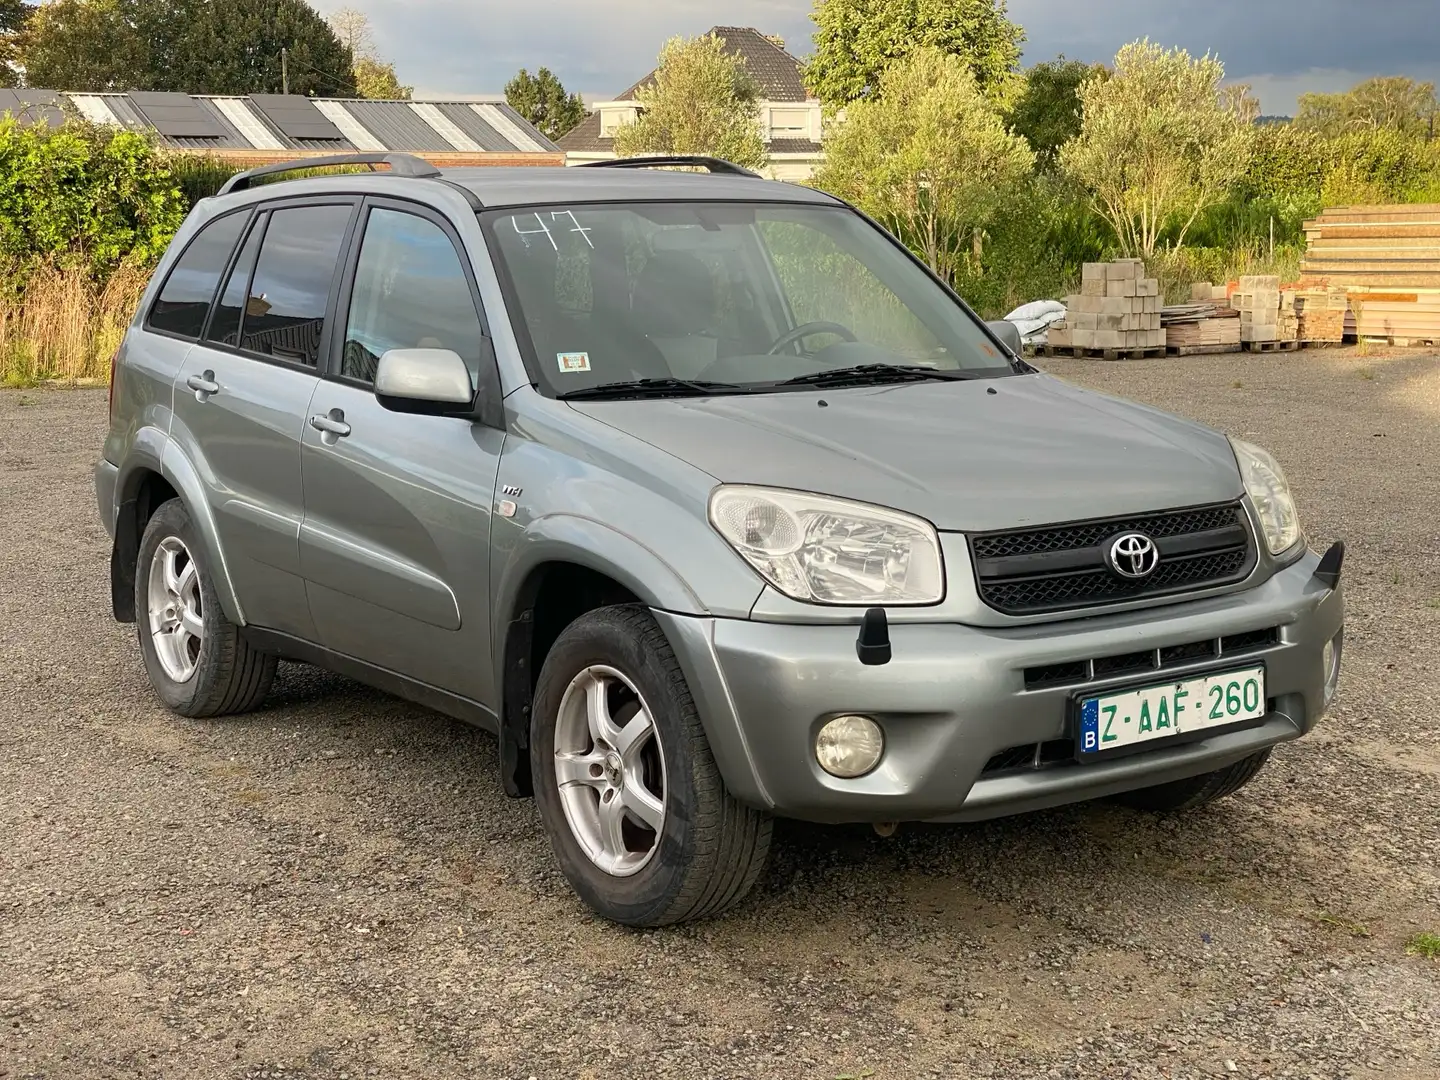 Toyota RAV 4 SUV4x4  Essence Climatise only to Africa Gris - 2